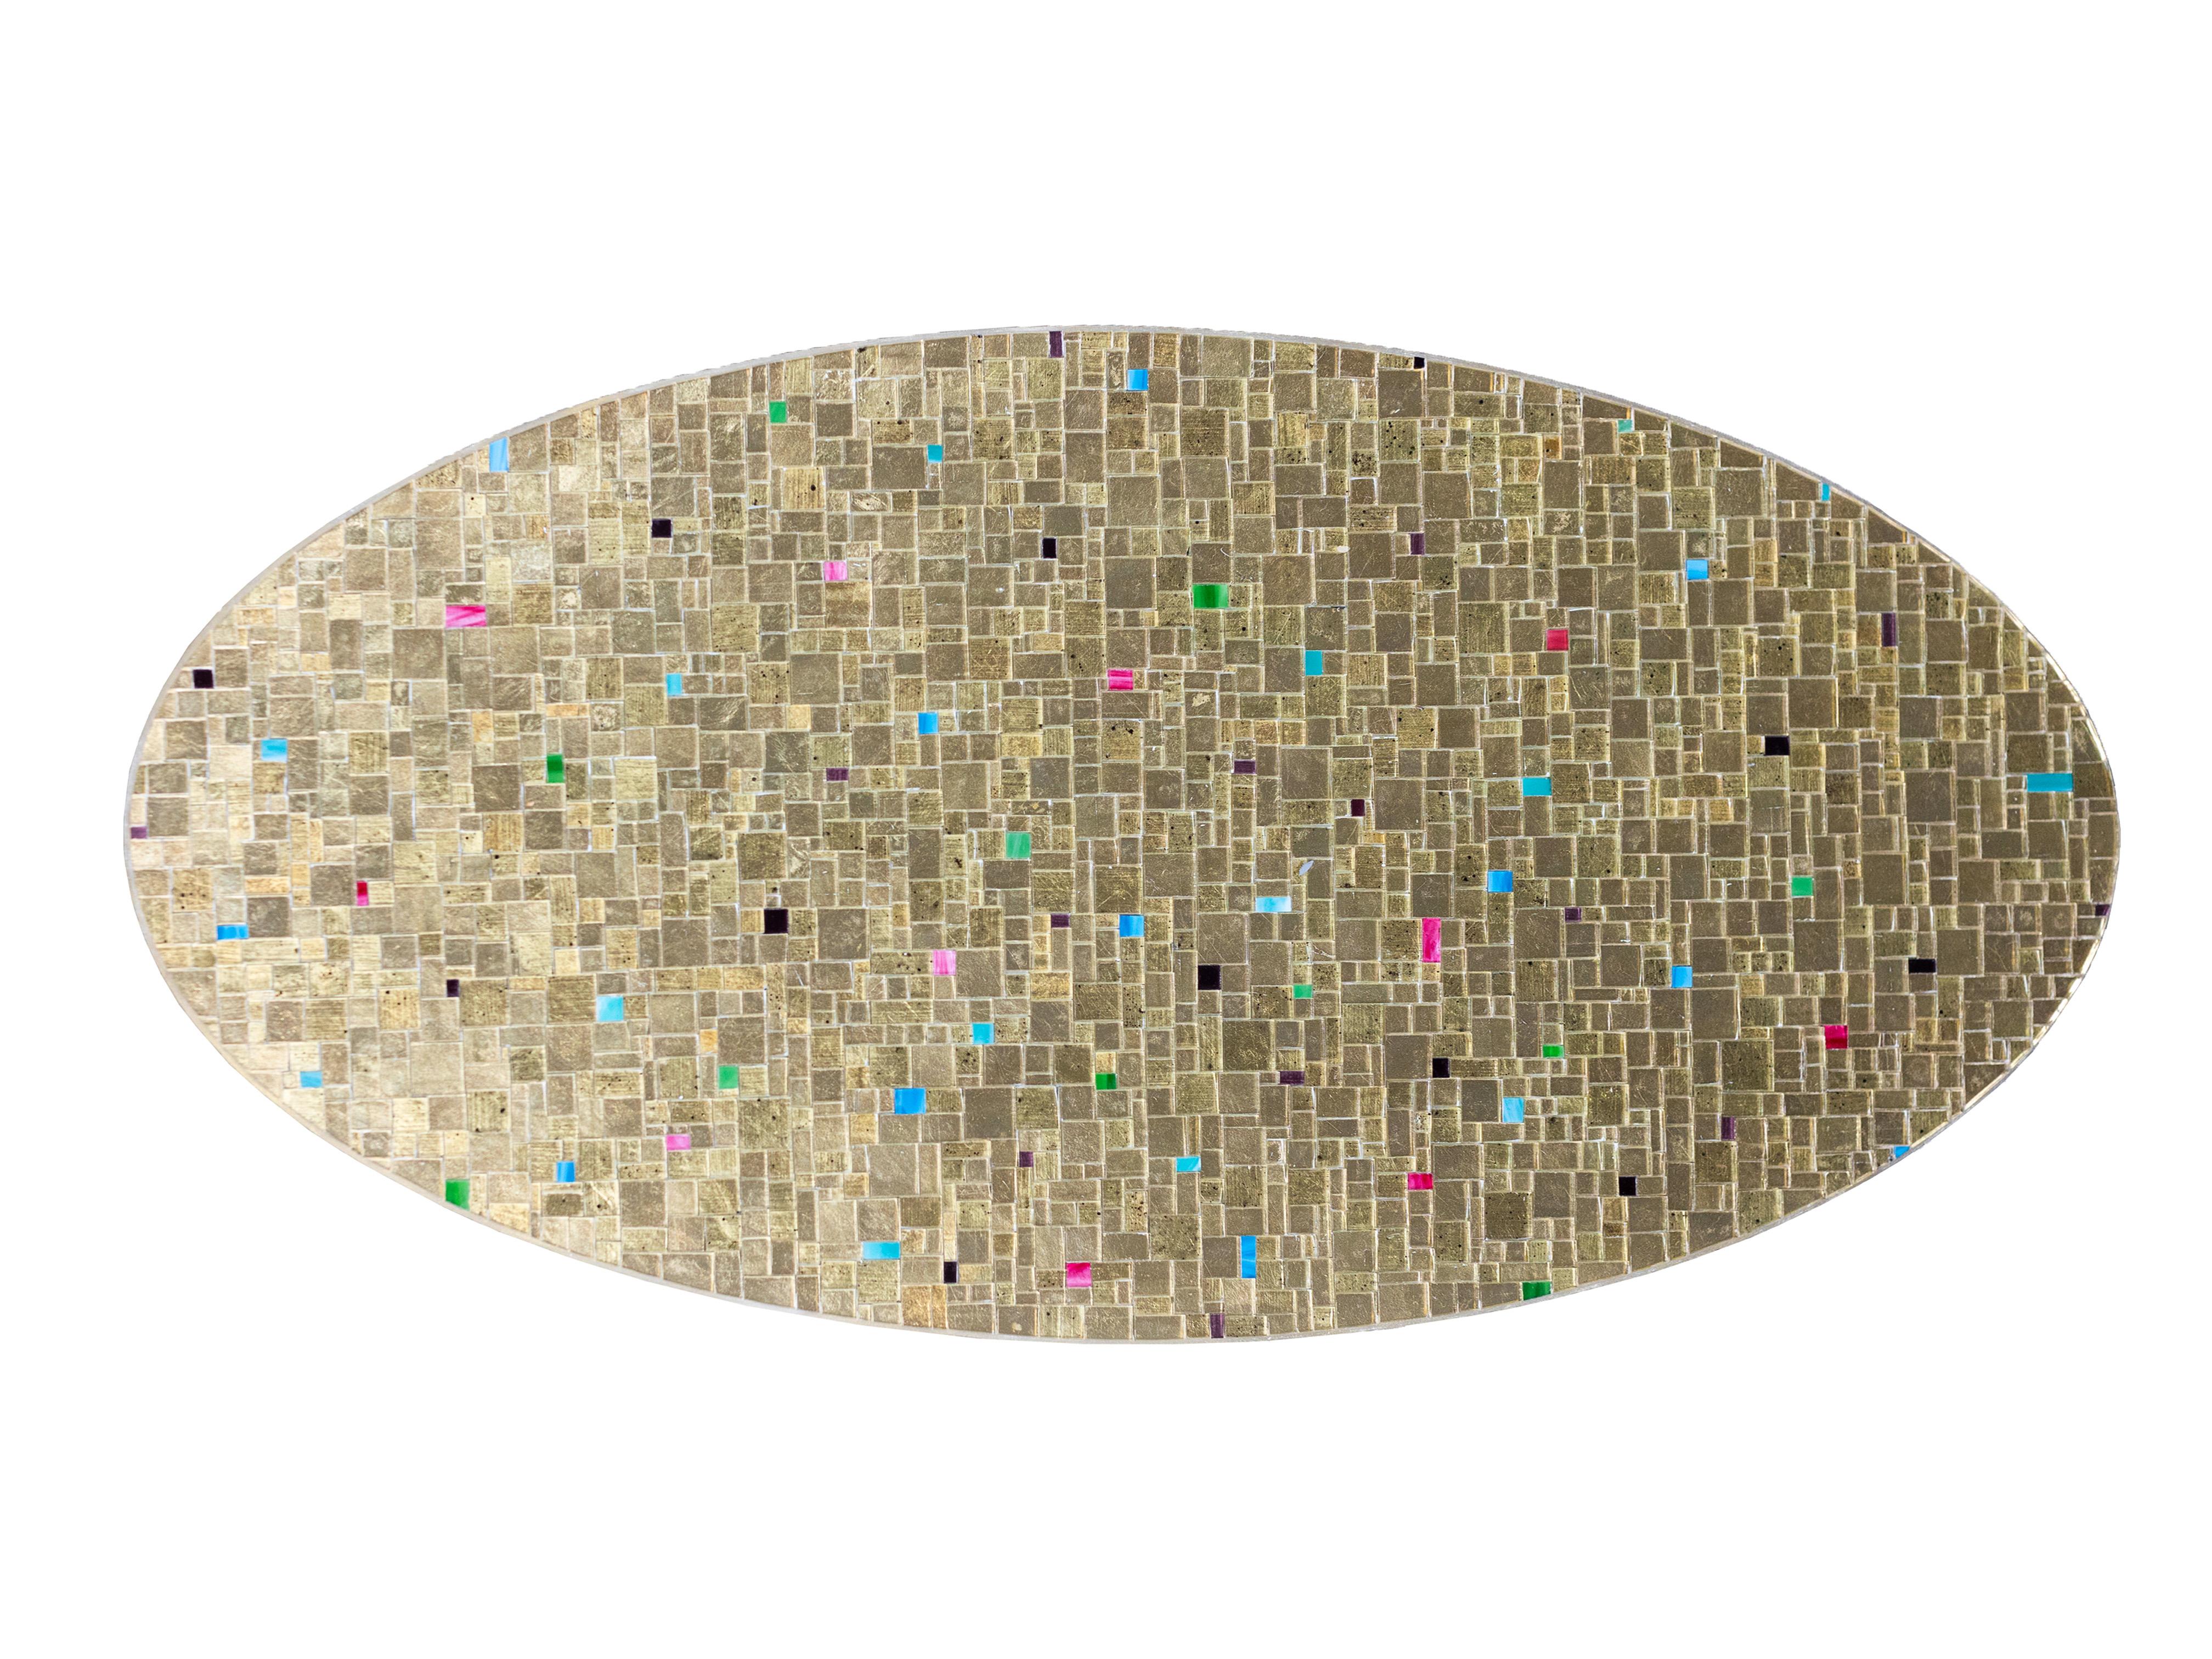 Ercole Home's Modern Oval Moon Gold Mosaic coffee table is a beautifully designed piece that blends modern lines with sophisticated materials. The sleek oval shape is covered in a stunning mosaic pattern, featuring hand-cut gold eglomise a glass